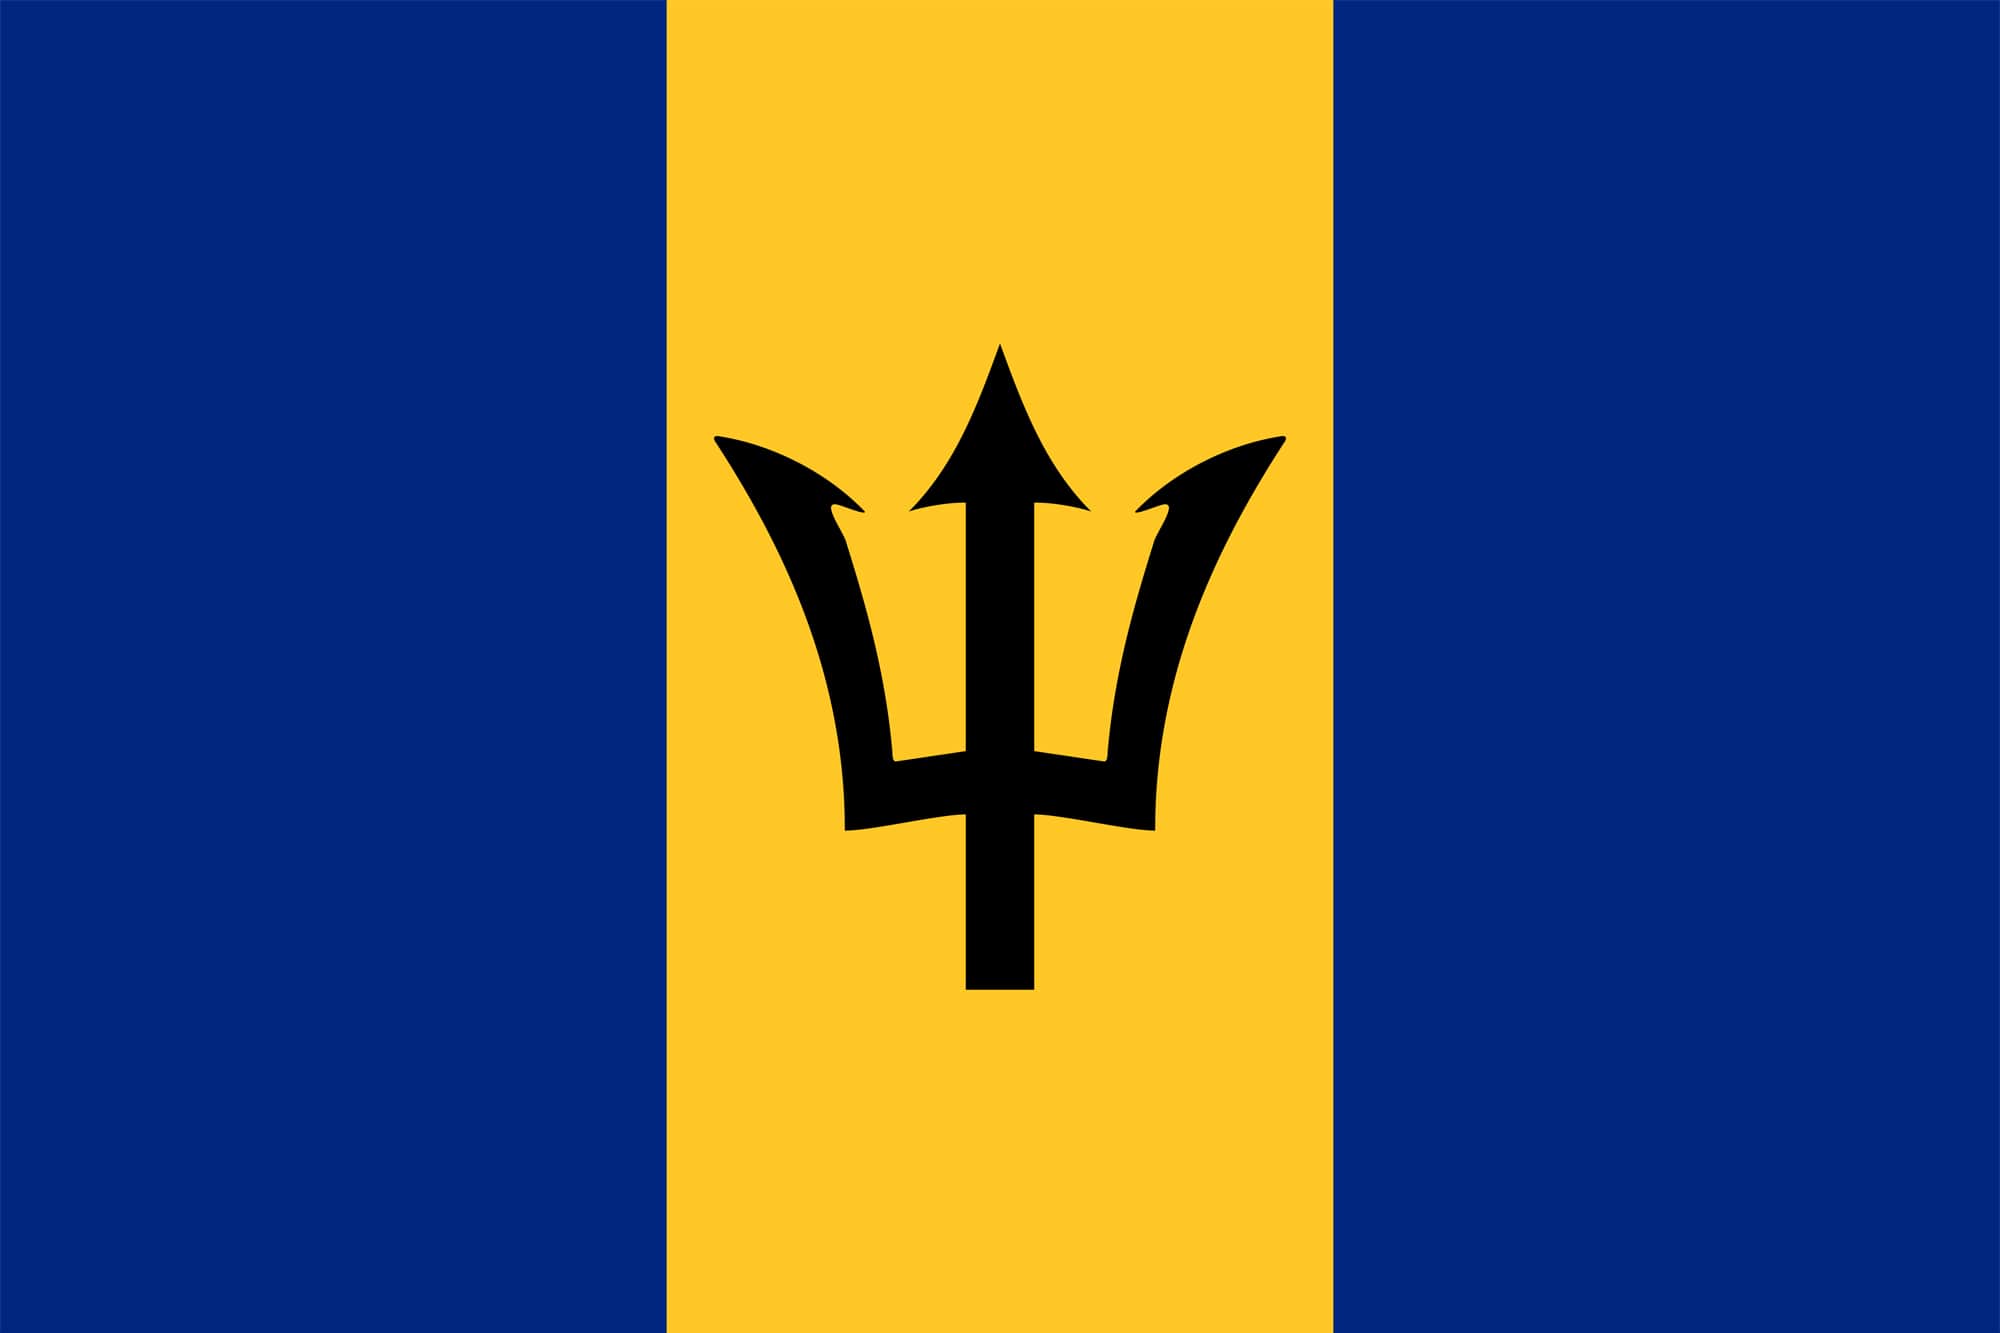 IMMAF announces a new member federation in Barbados